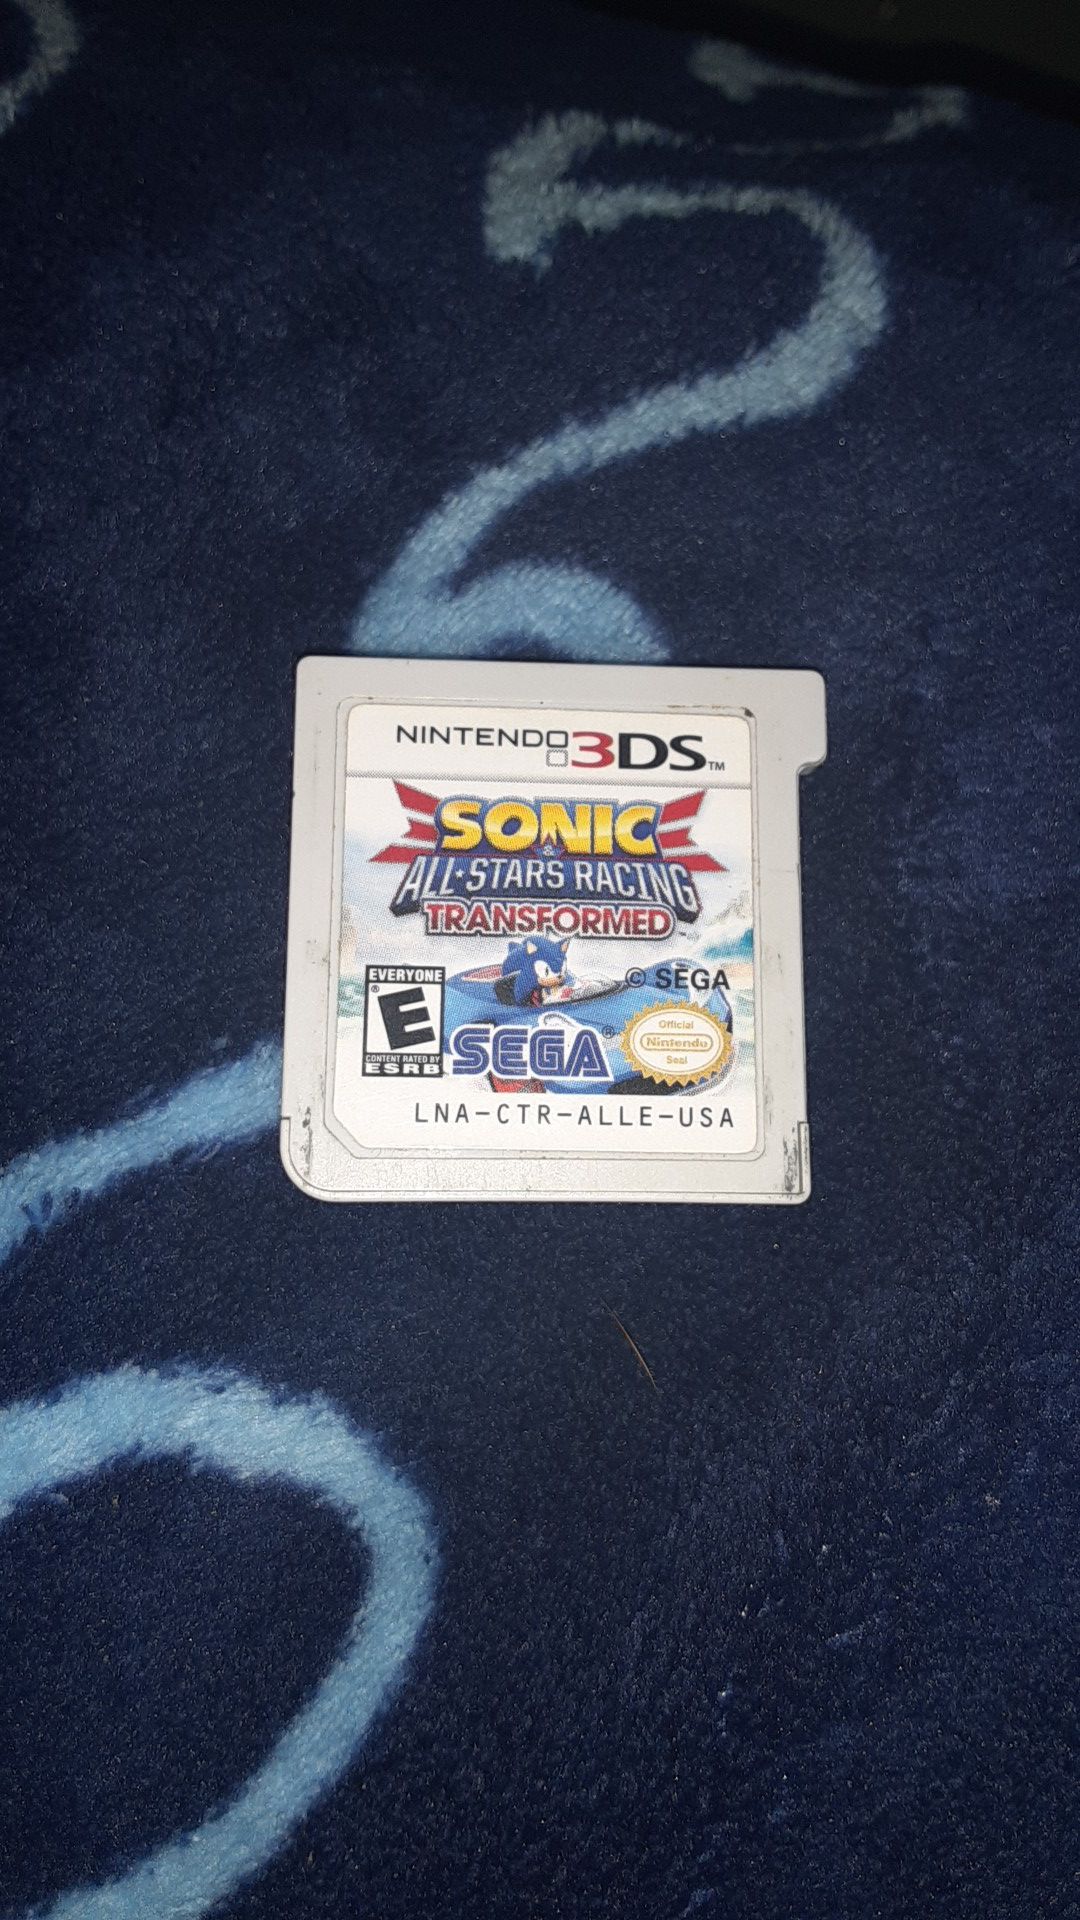 Sonic all star racing transformed 3ds game